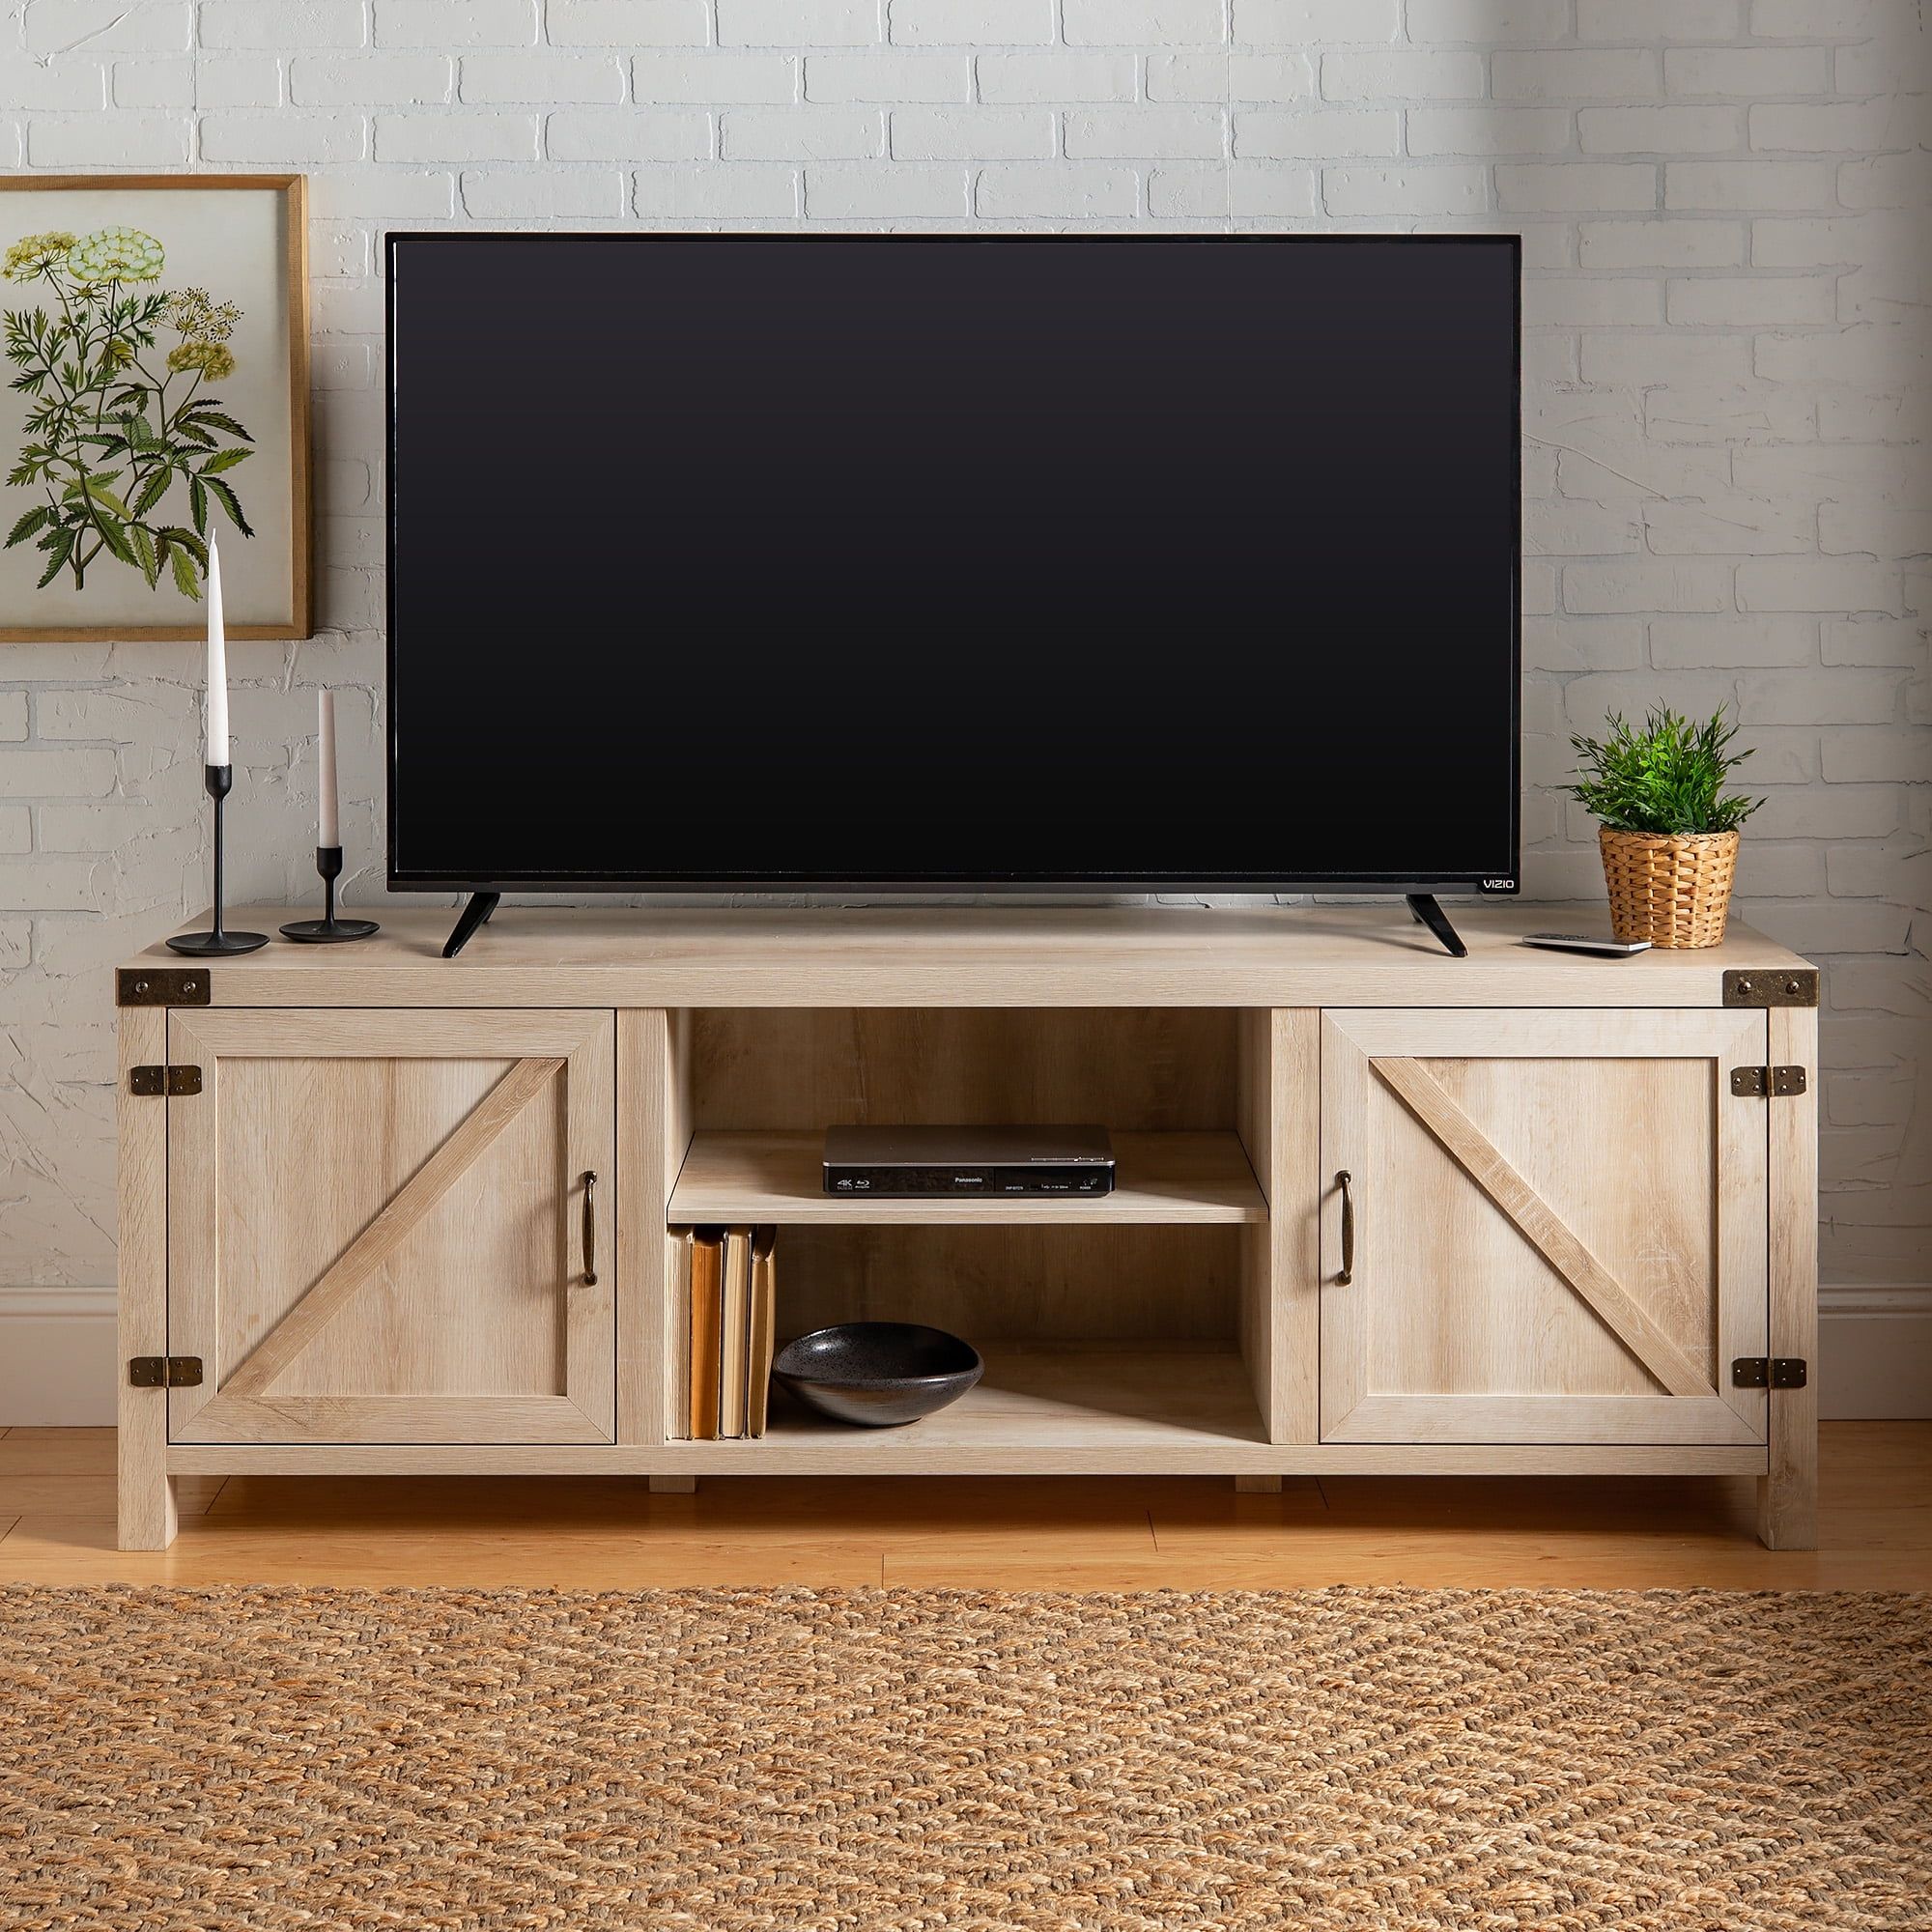 Woven Paths Farmhouse Barn Door Tv Stand For Tvs Up To 80", White Oak In Farmhouse Stands For Tvs (View 2 of 20)